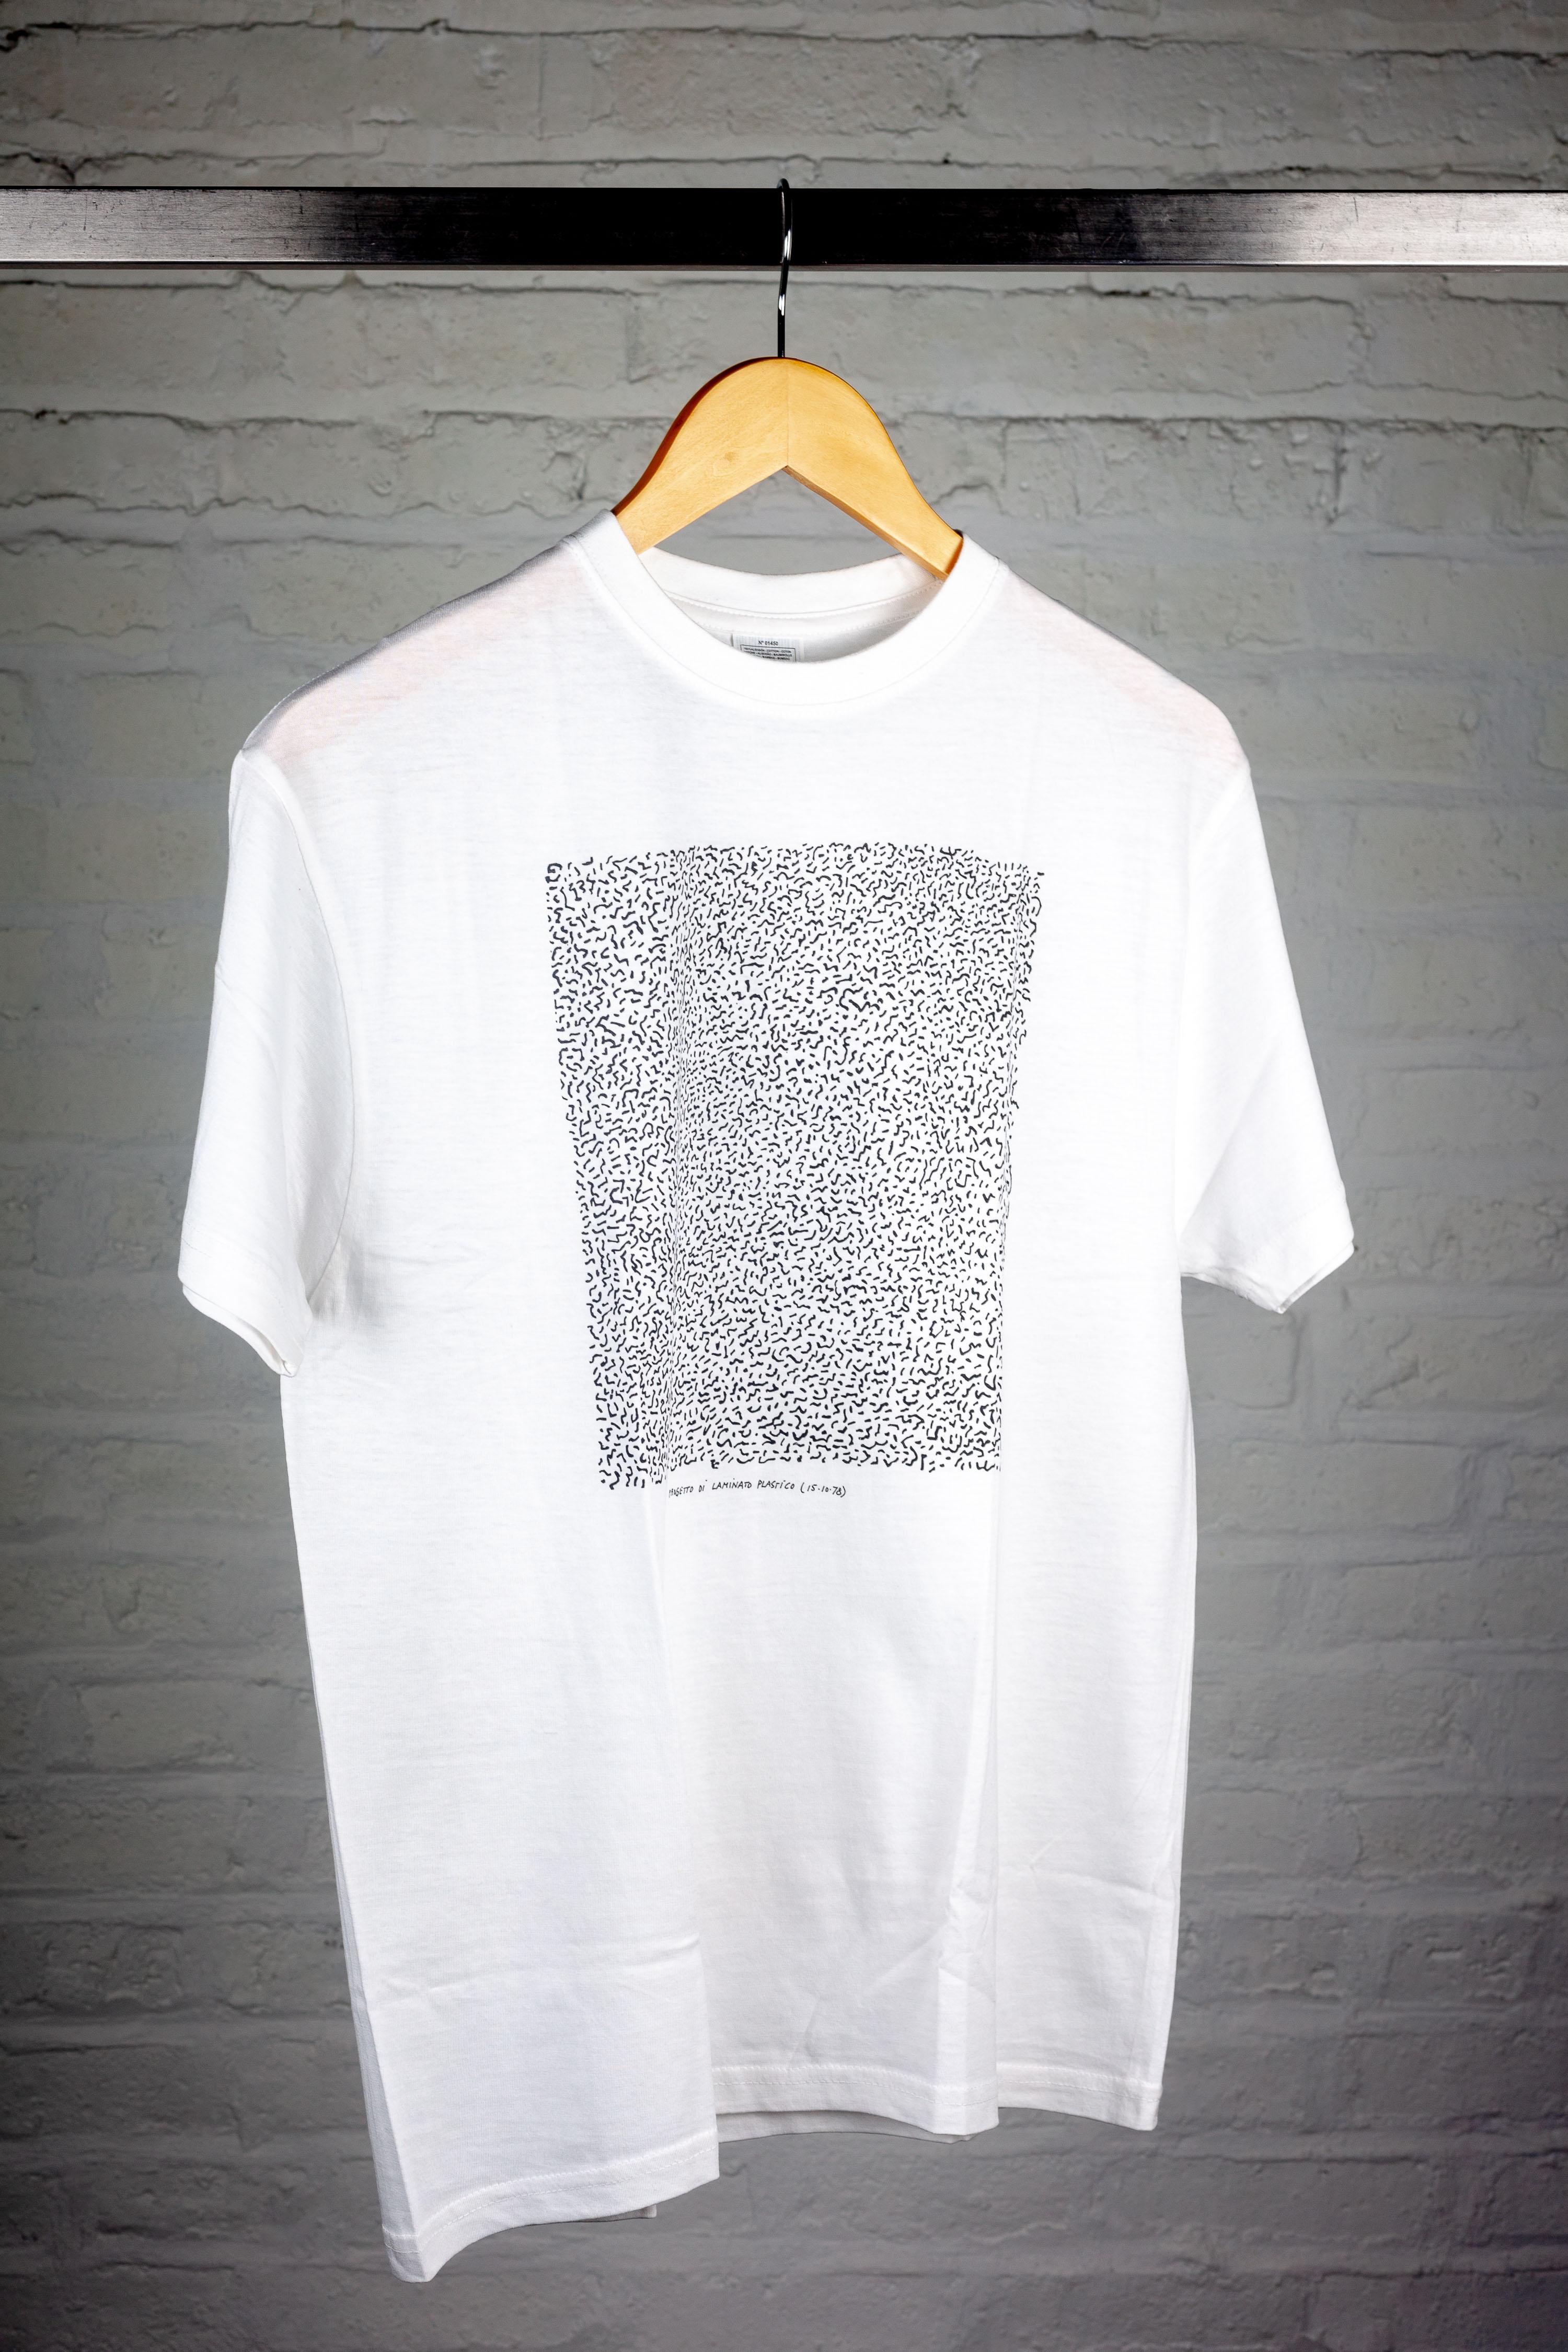 This t-shirt is a wearable homage to the visionary design of Ettore Sottsass, featuring a reproduction of the original hand-drawn sketch of his famous Bacterio pattern. Released in conjunction with the 2017 exhibition 